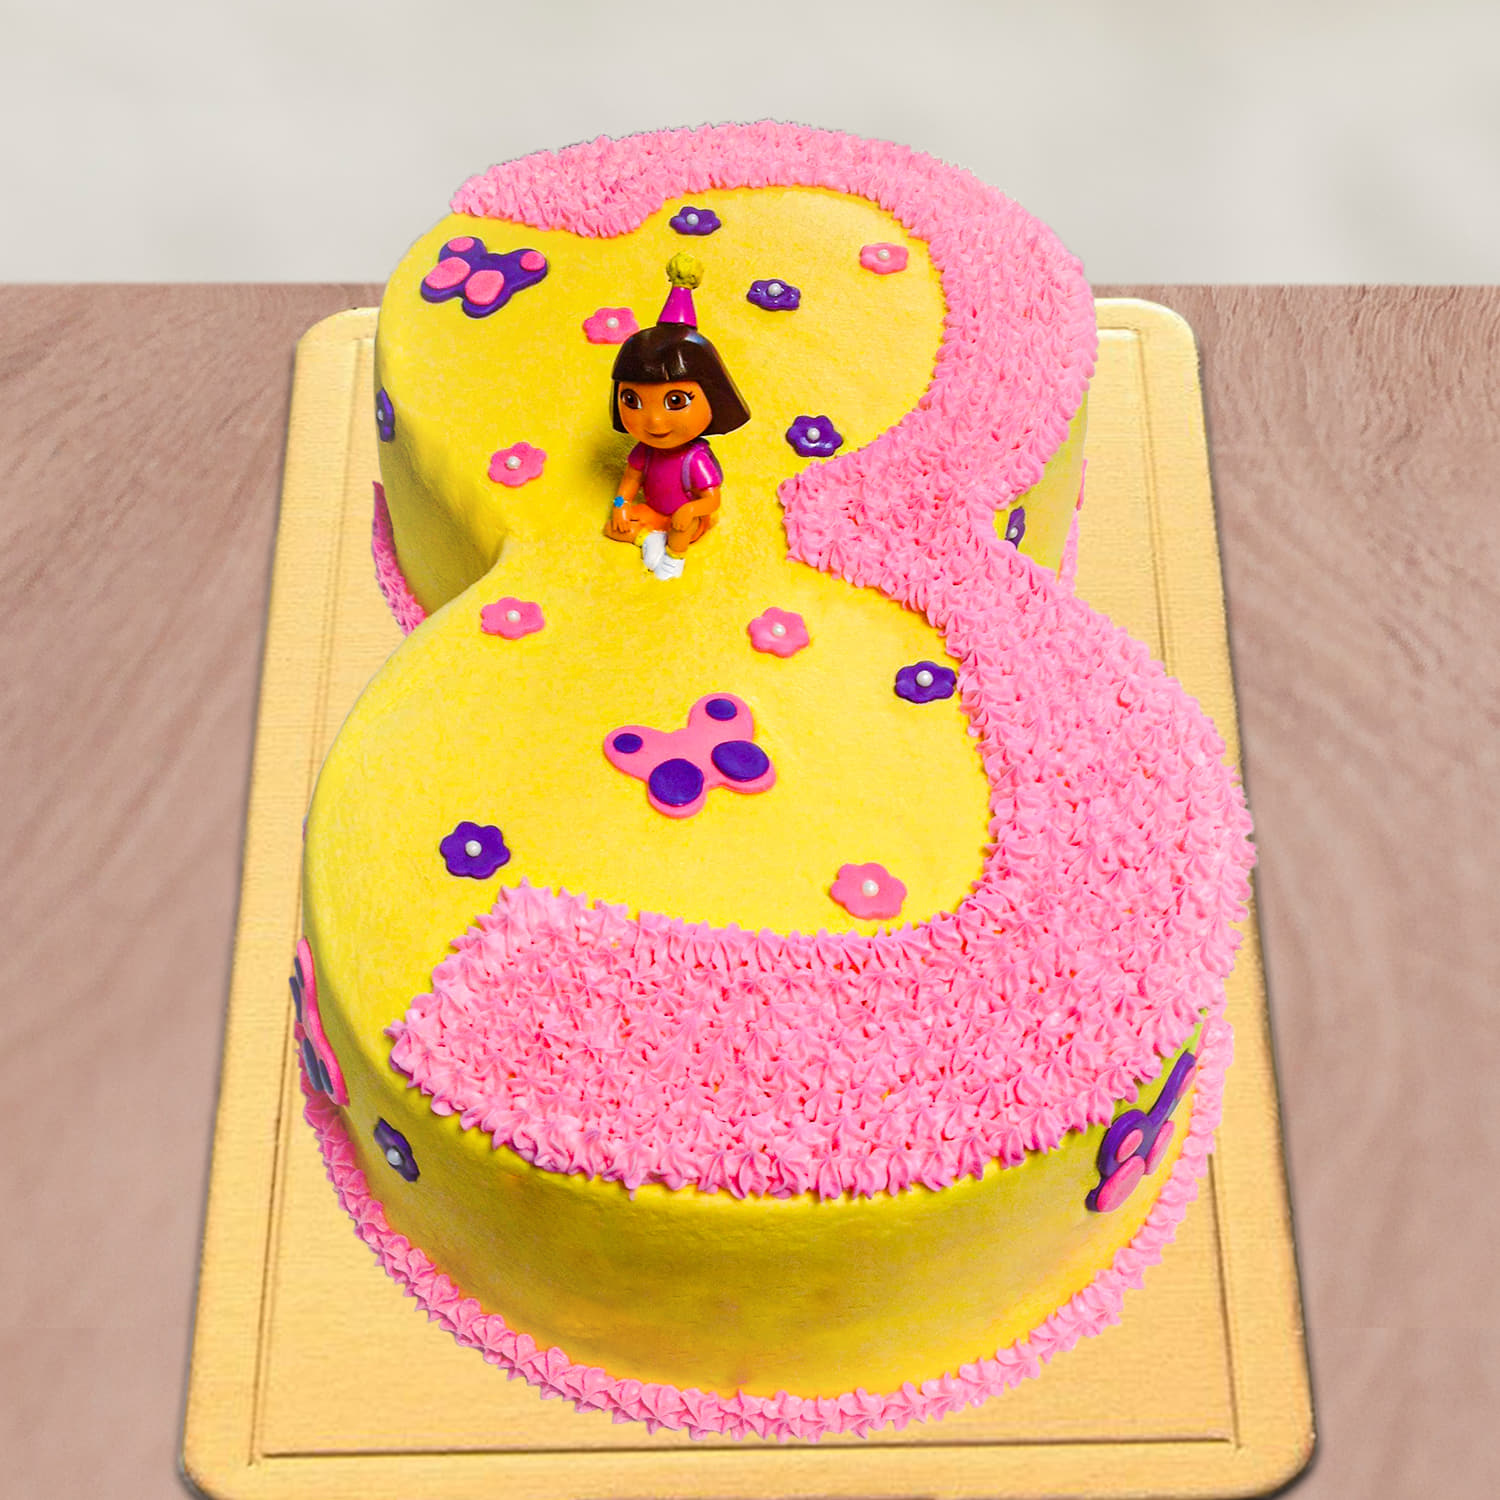 Dora Drawing Cake, 24x7 Home delivery of Cake in J P NAGAR 3RD PHASE,  Banglore